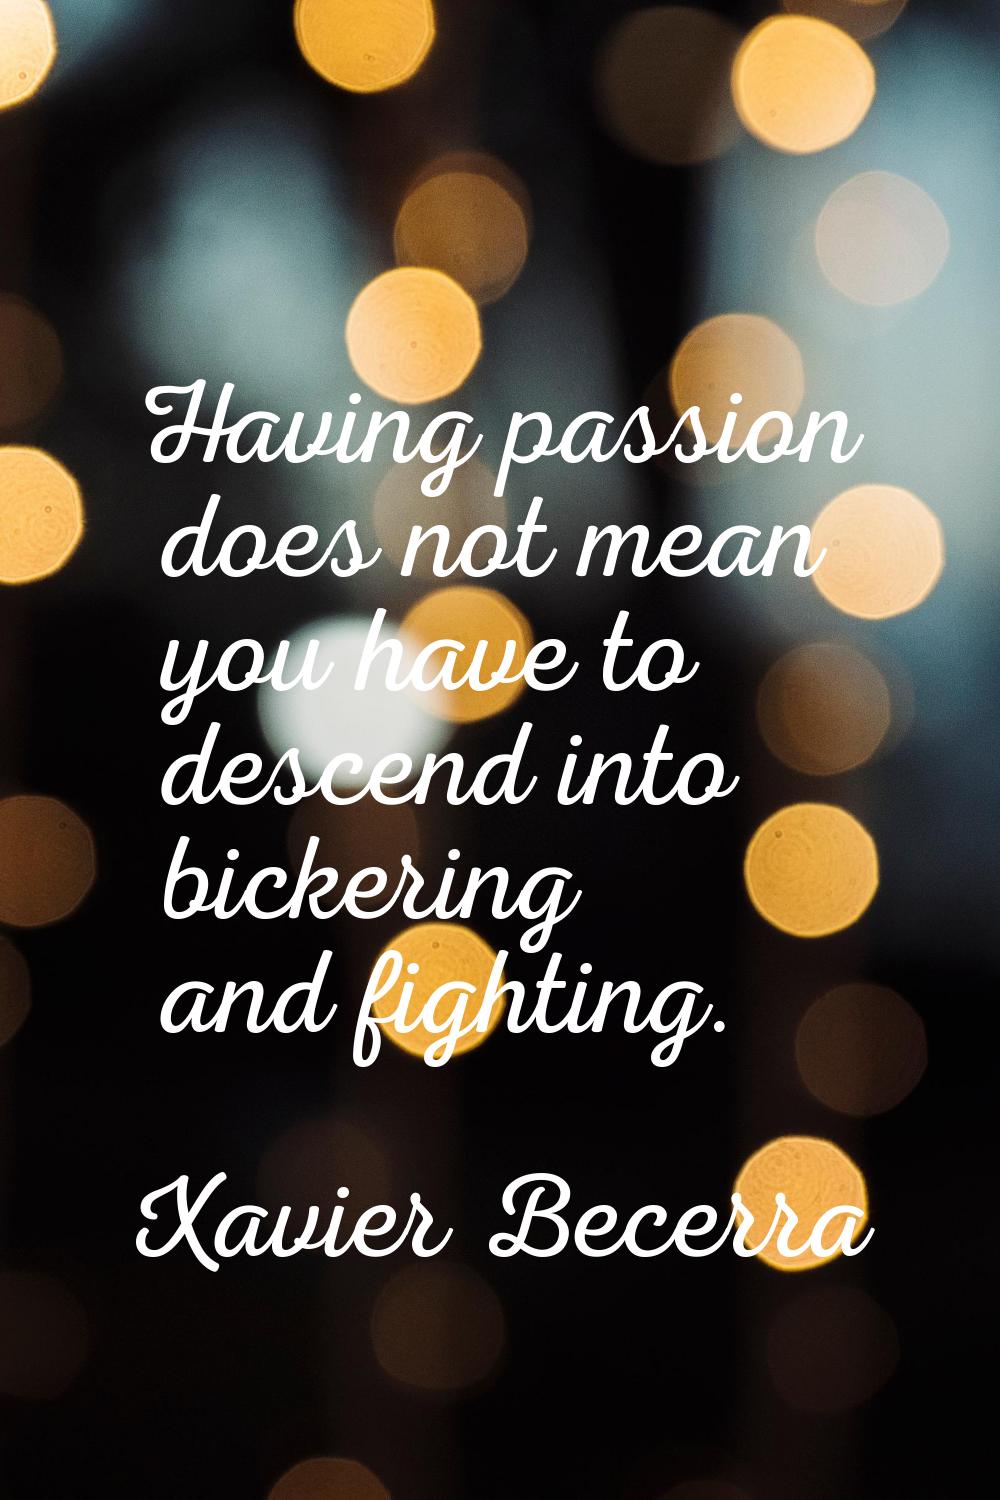 Having passion does not mean you have to descend into bickering and fighting.